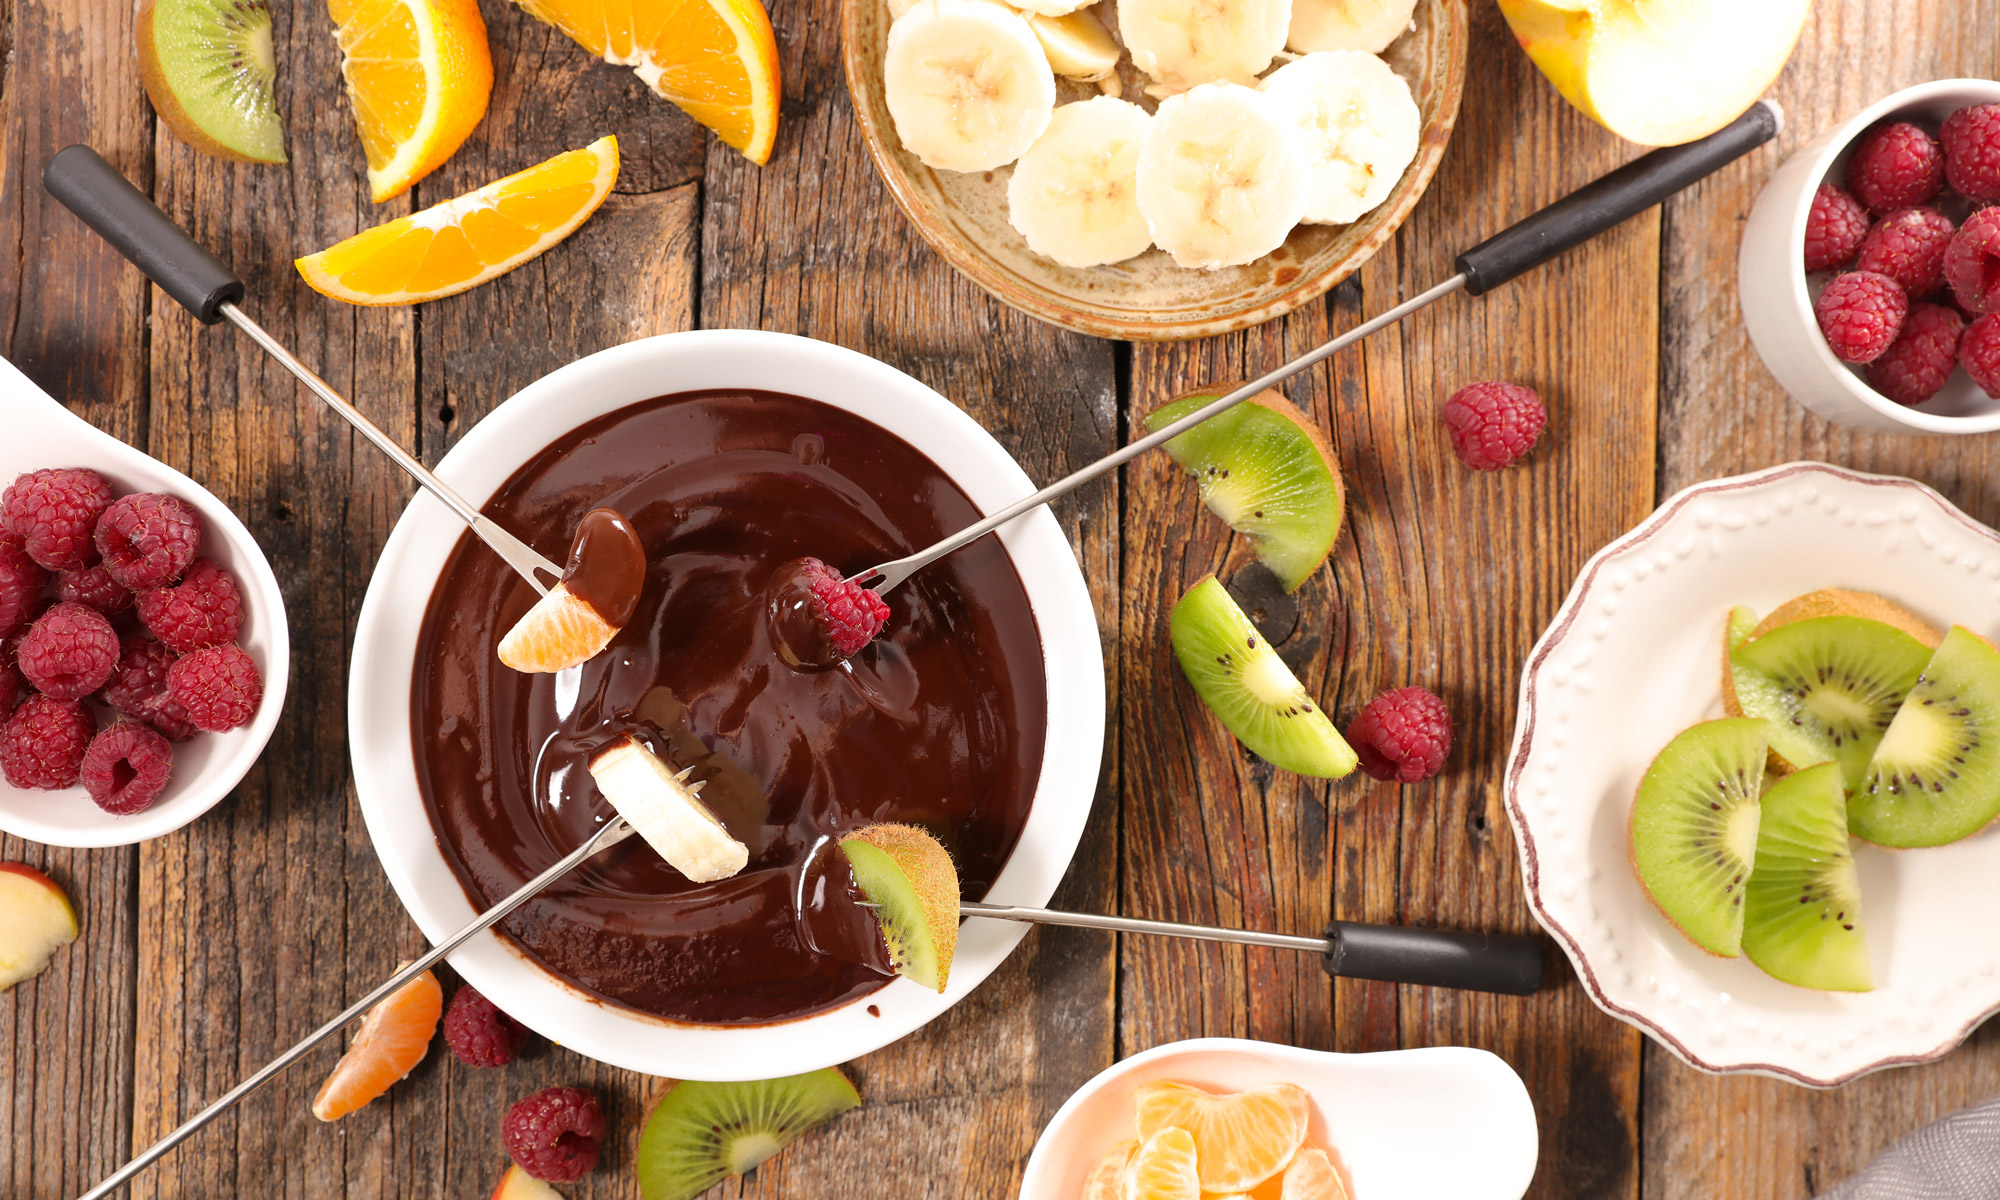 How to Throw a Fondue Party from Apps to Dessert